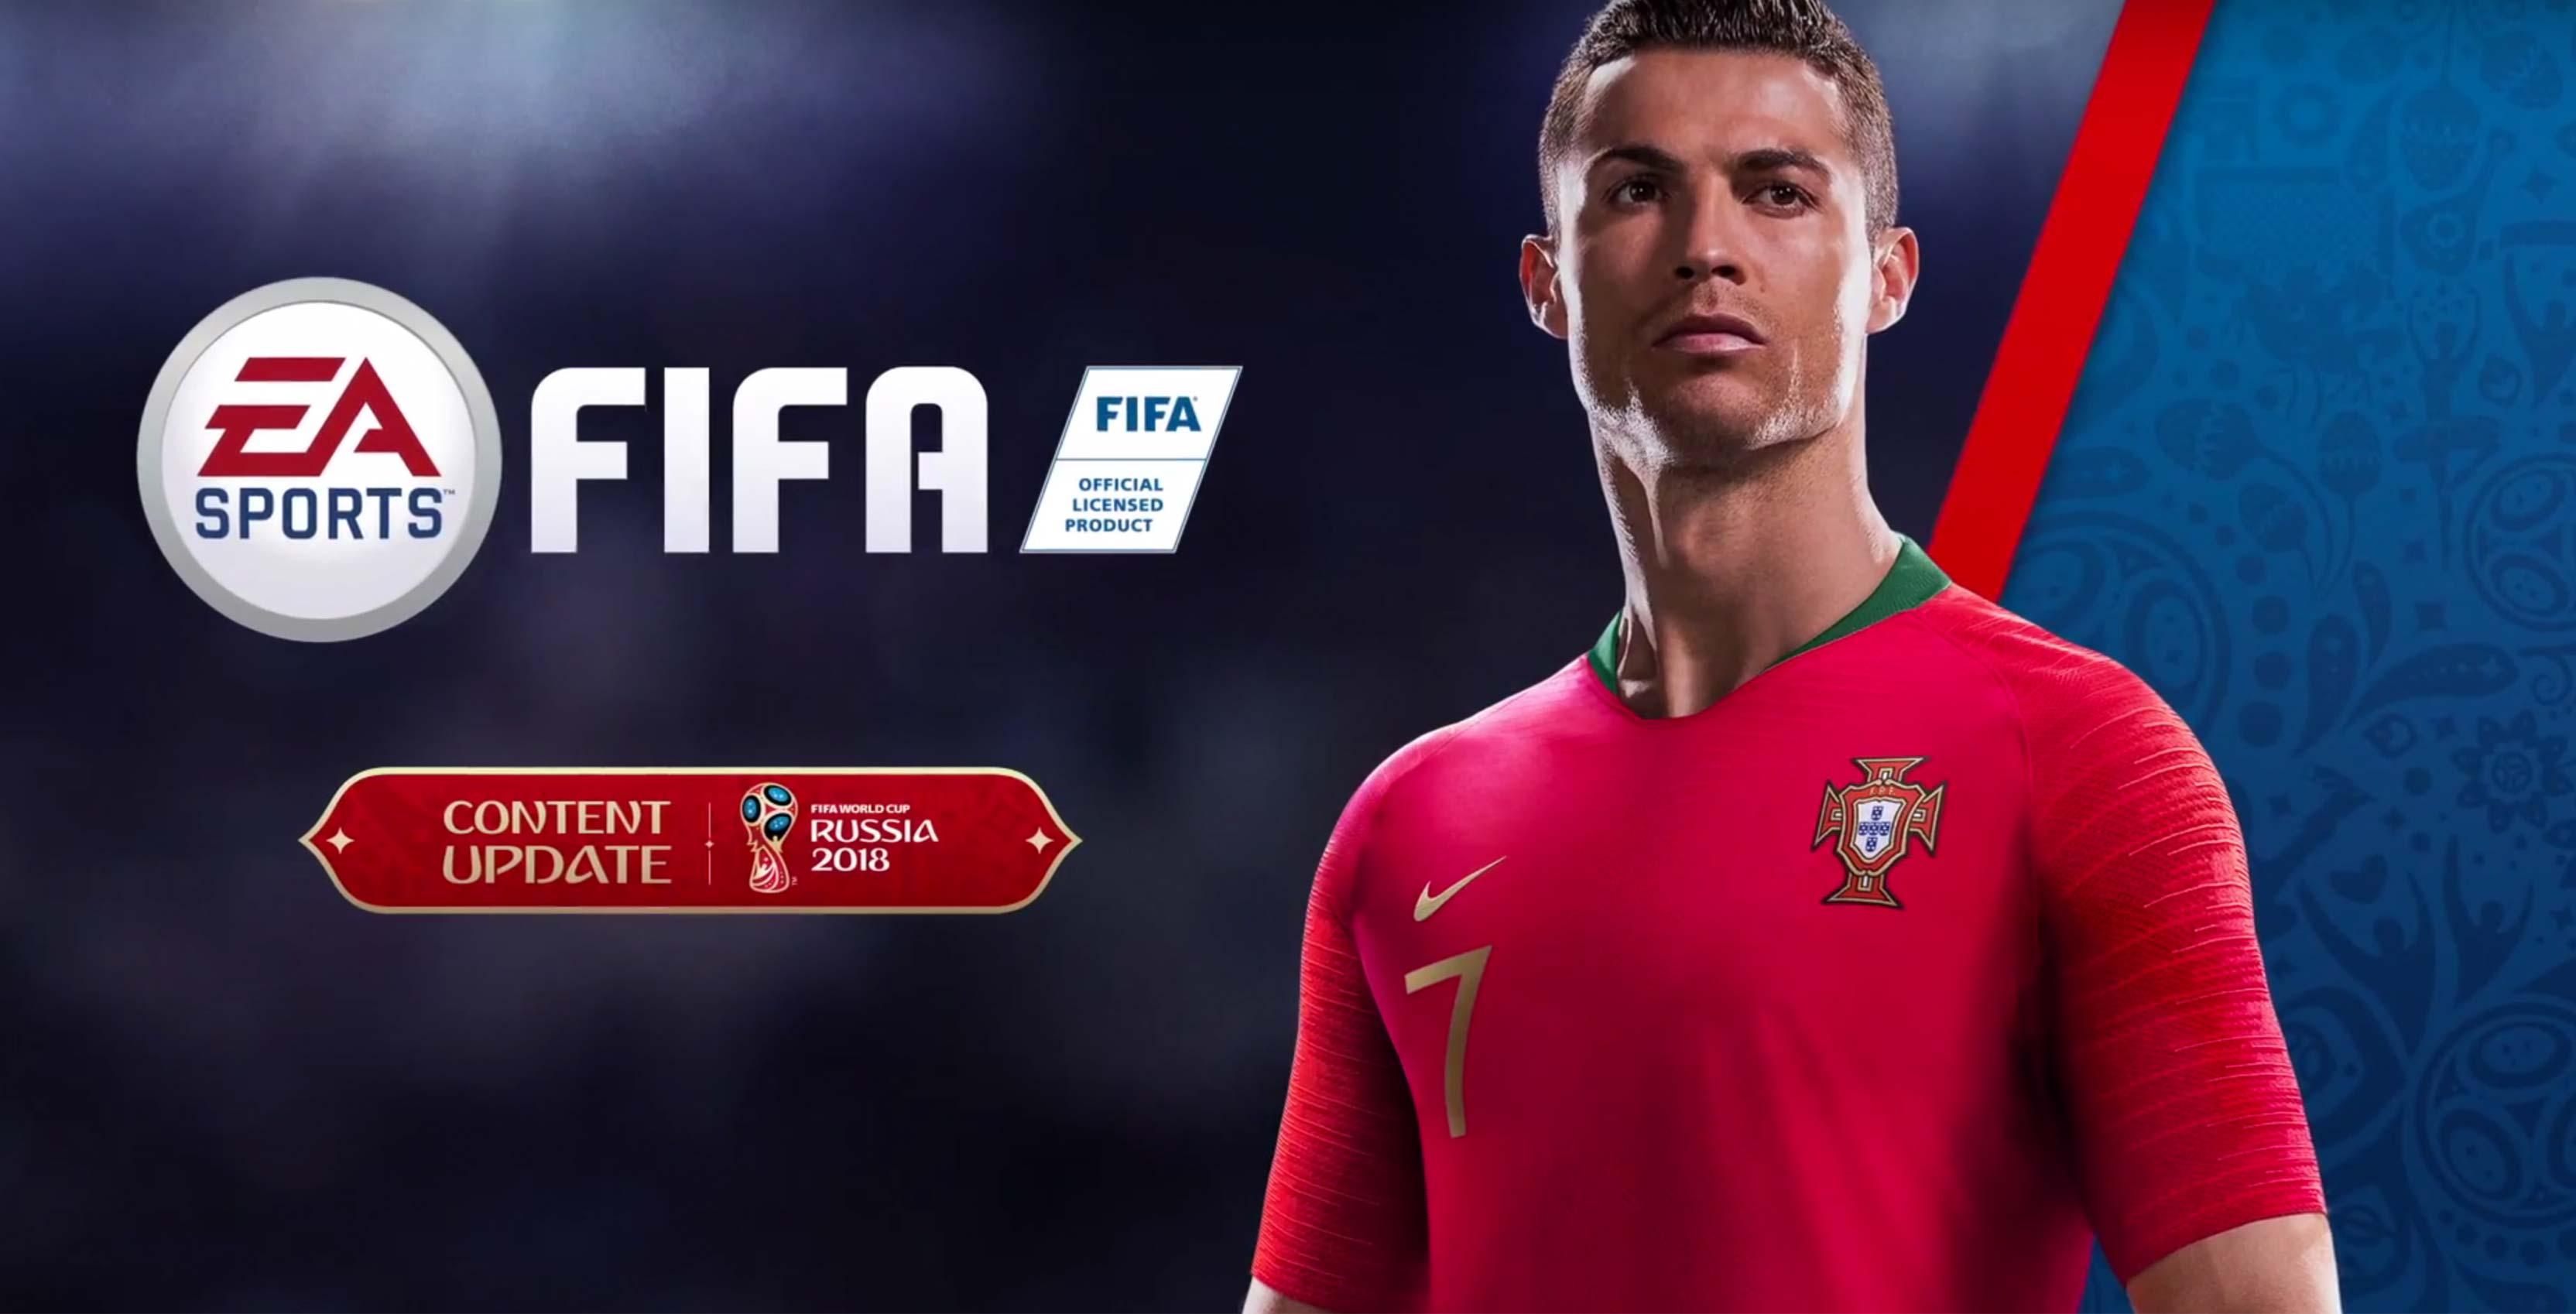 Ea S Mobile Fifa Game Is Getting A World Cup Themed Campaign